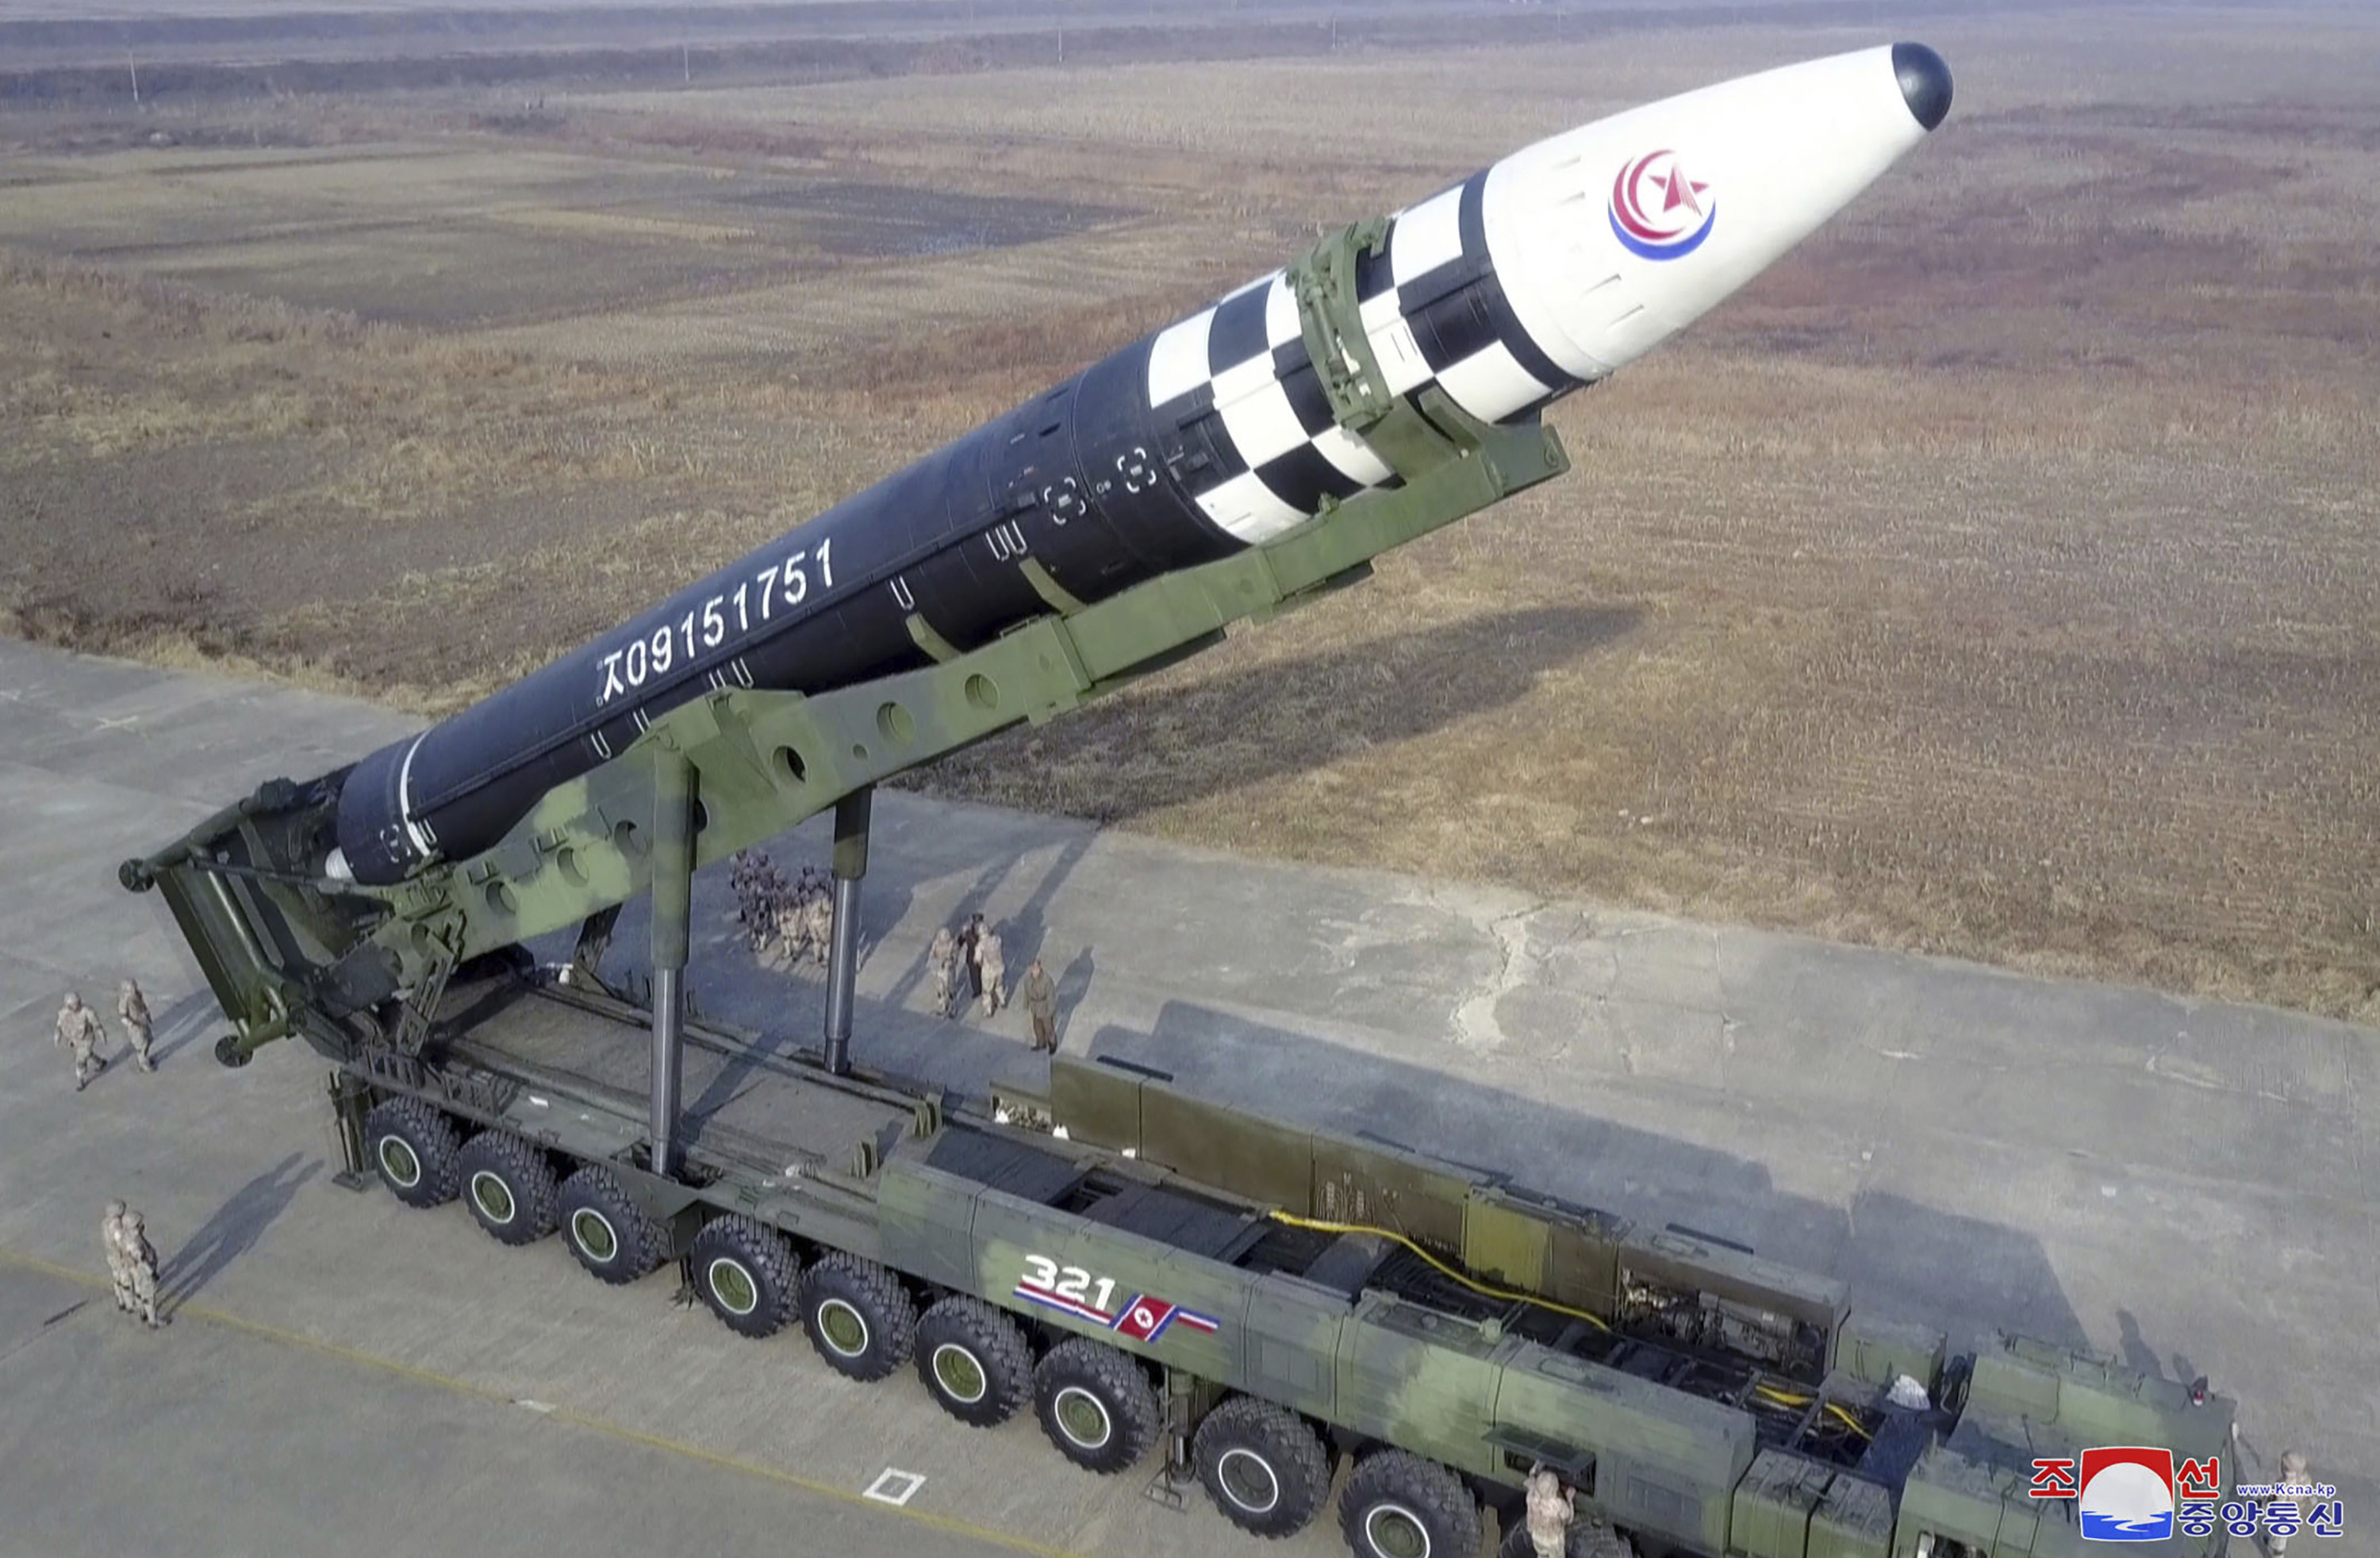 A photo provided by the North Korean government shows what it says is a Hwasong-17 intercontinental ballistic missile before its test firing at Pyongyang International Airport. Photo: AP